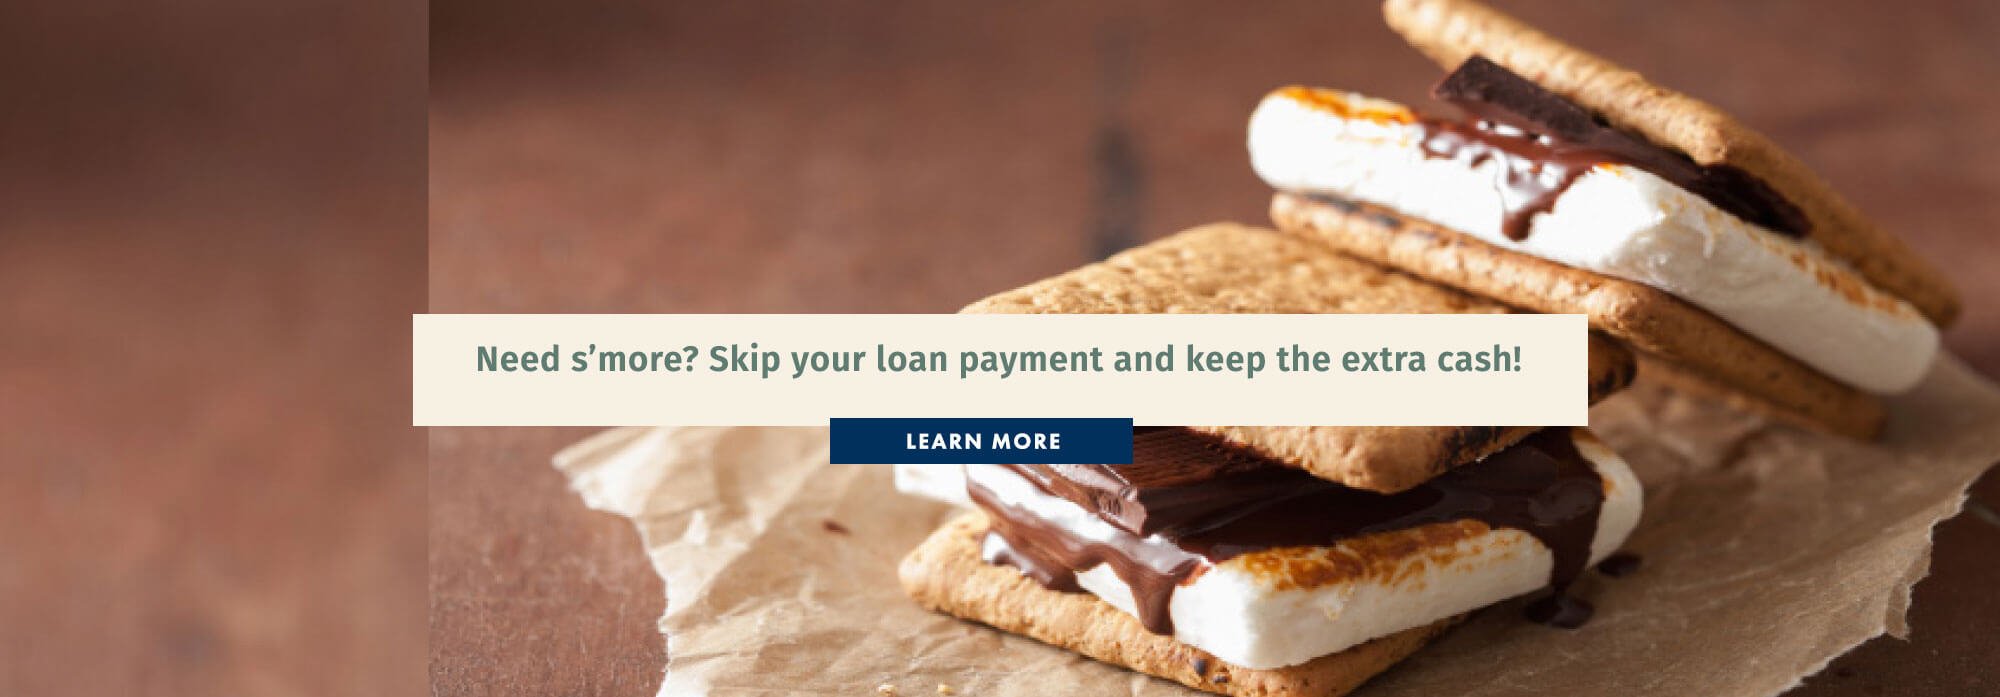 Need s'more? Skip your loan payment and keep the extra cash!